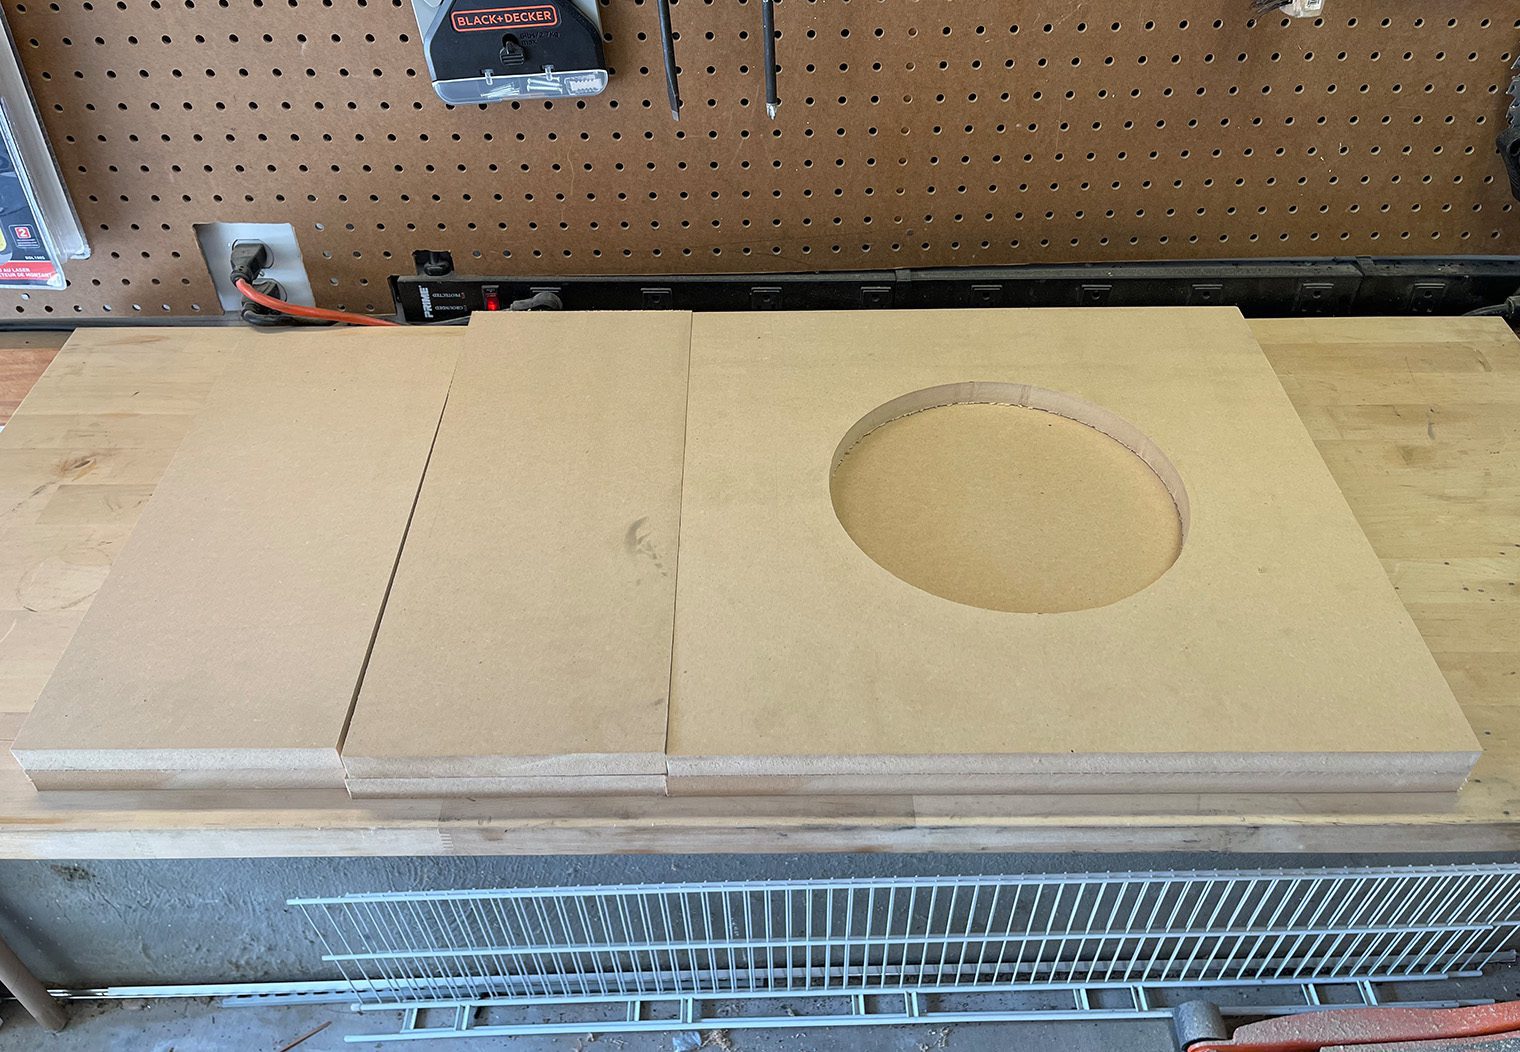 Picture of the cut MDF to assemble custom subwoofer enclosure for 2018 VW GTI MK7.5